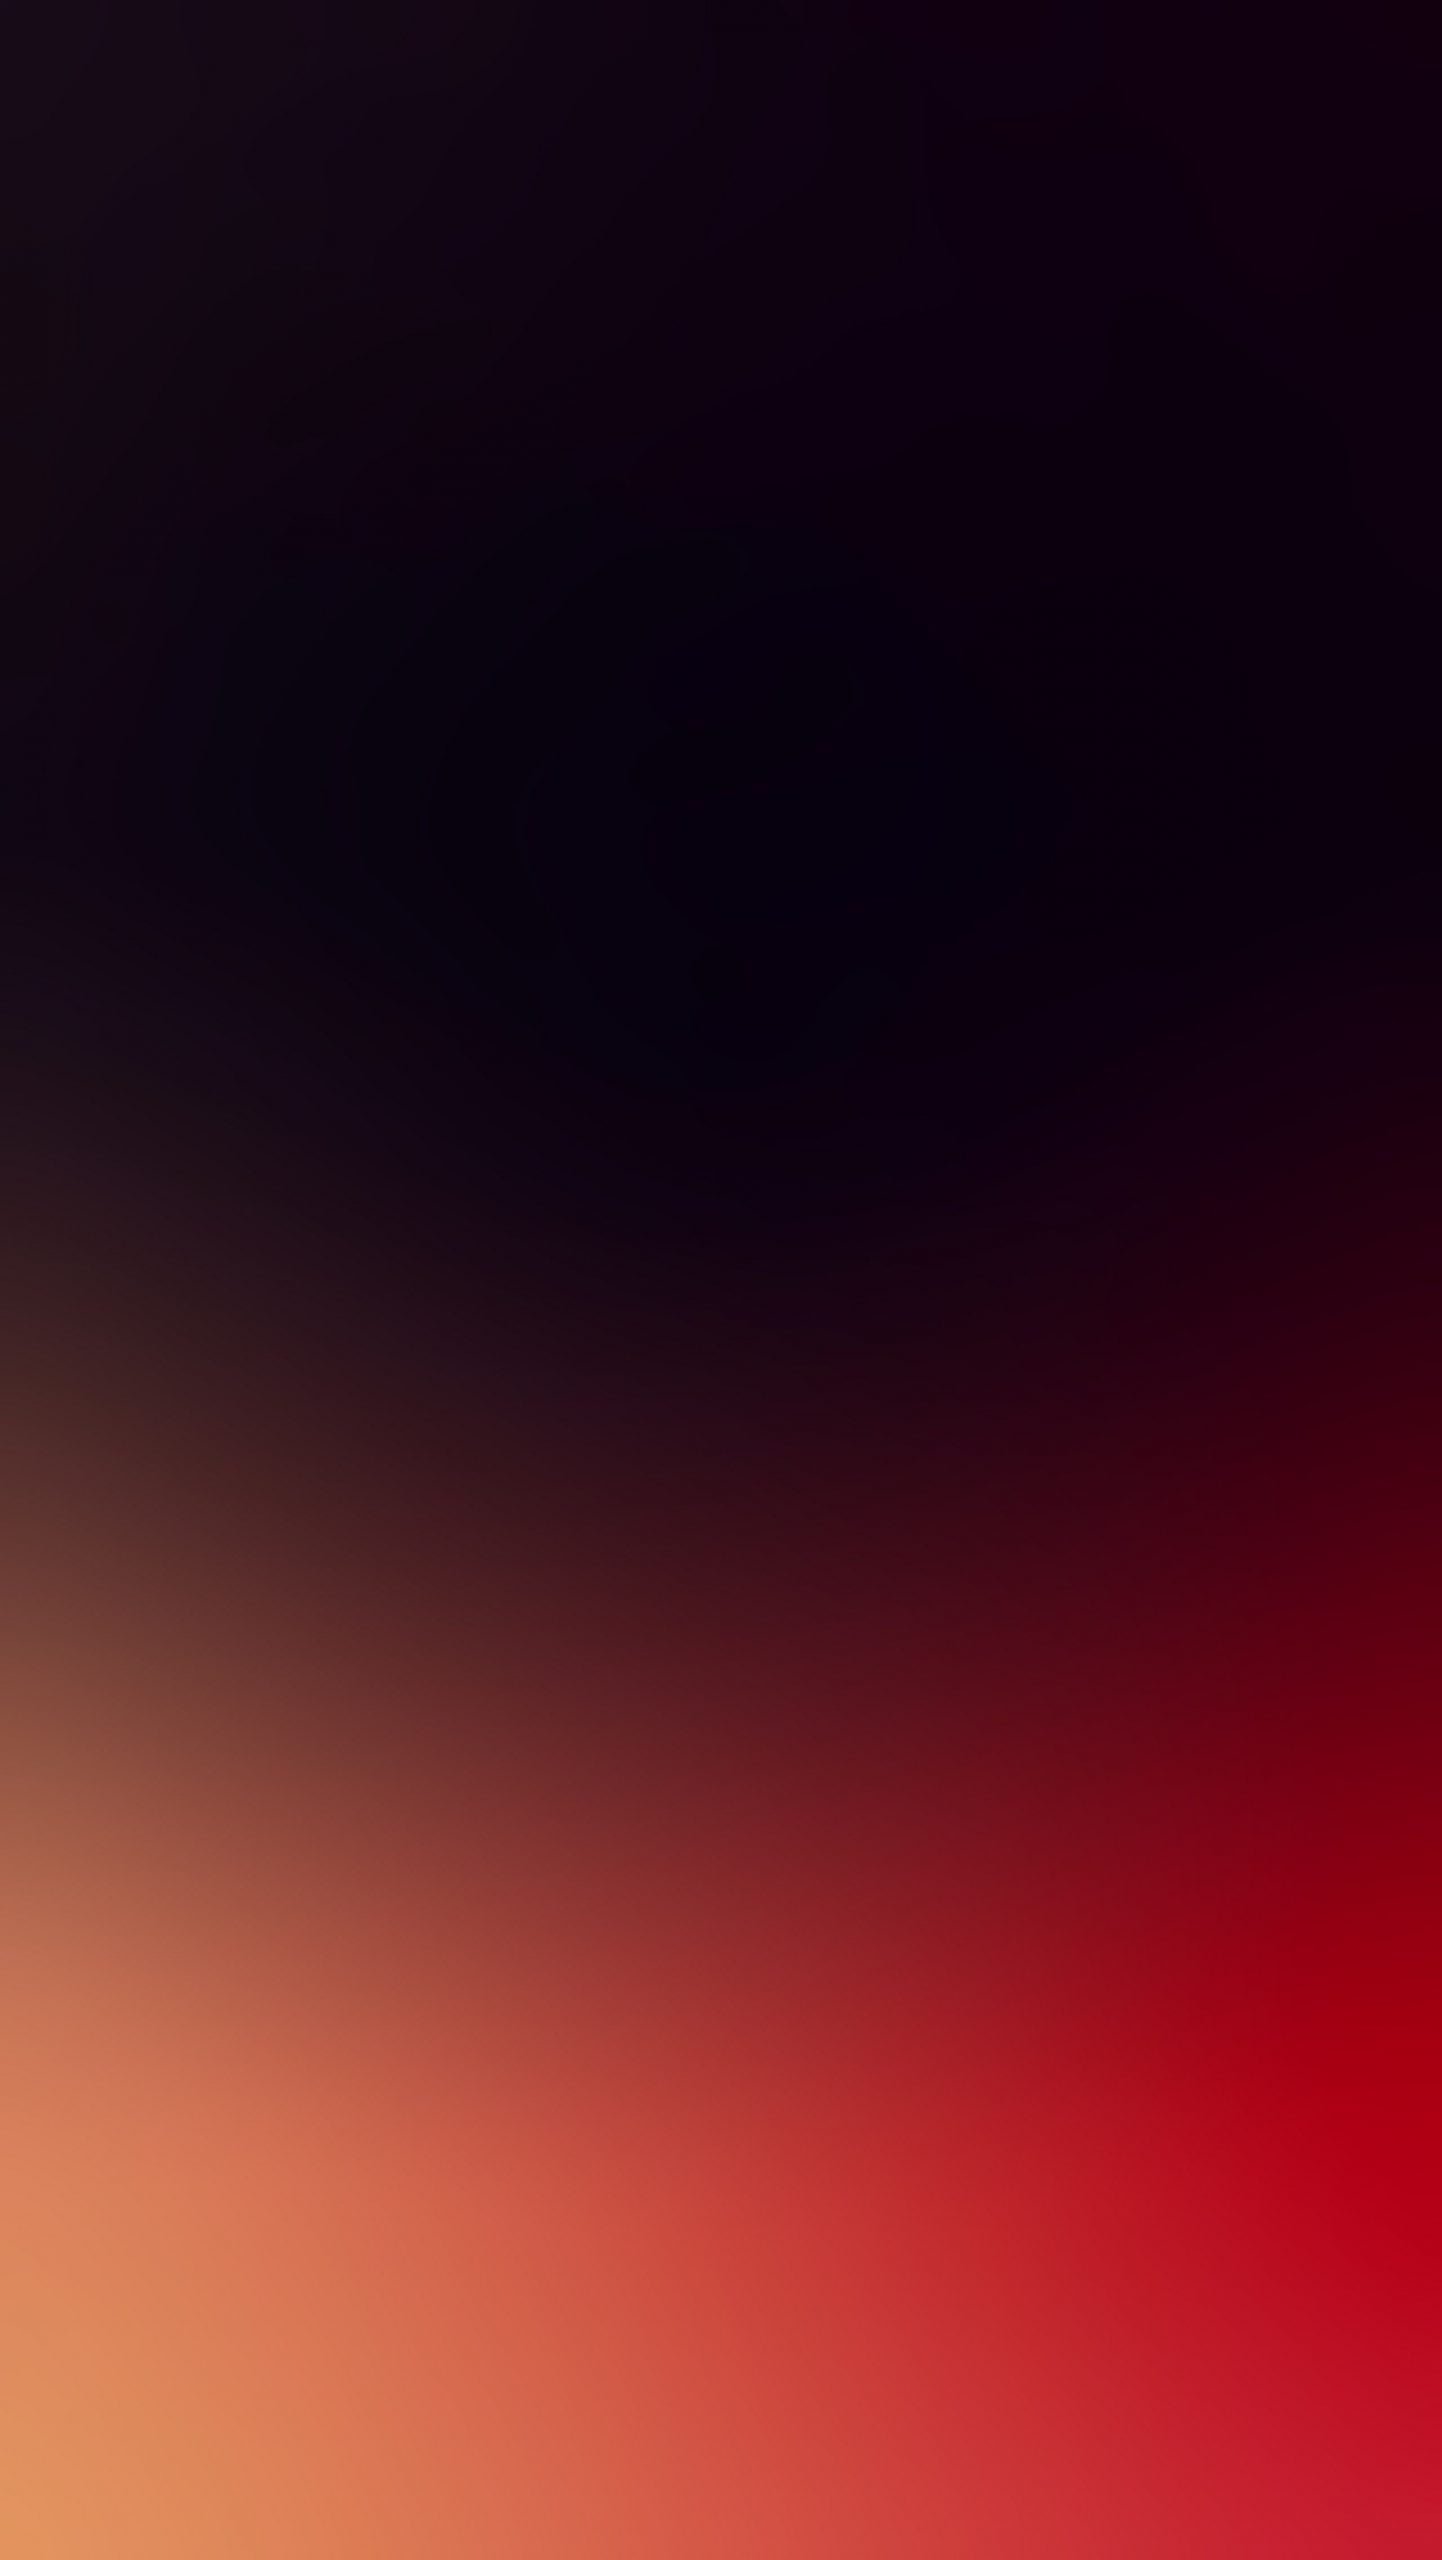 204689 red and black iphone wallpaper top free red and black iphone scaled